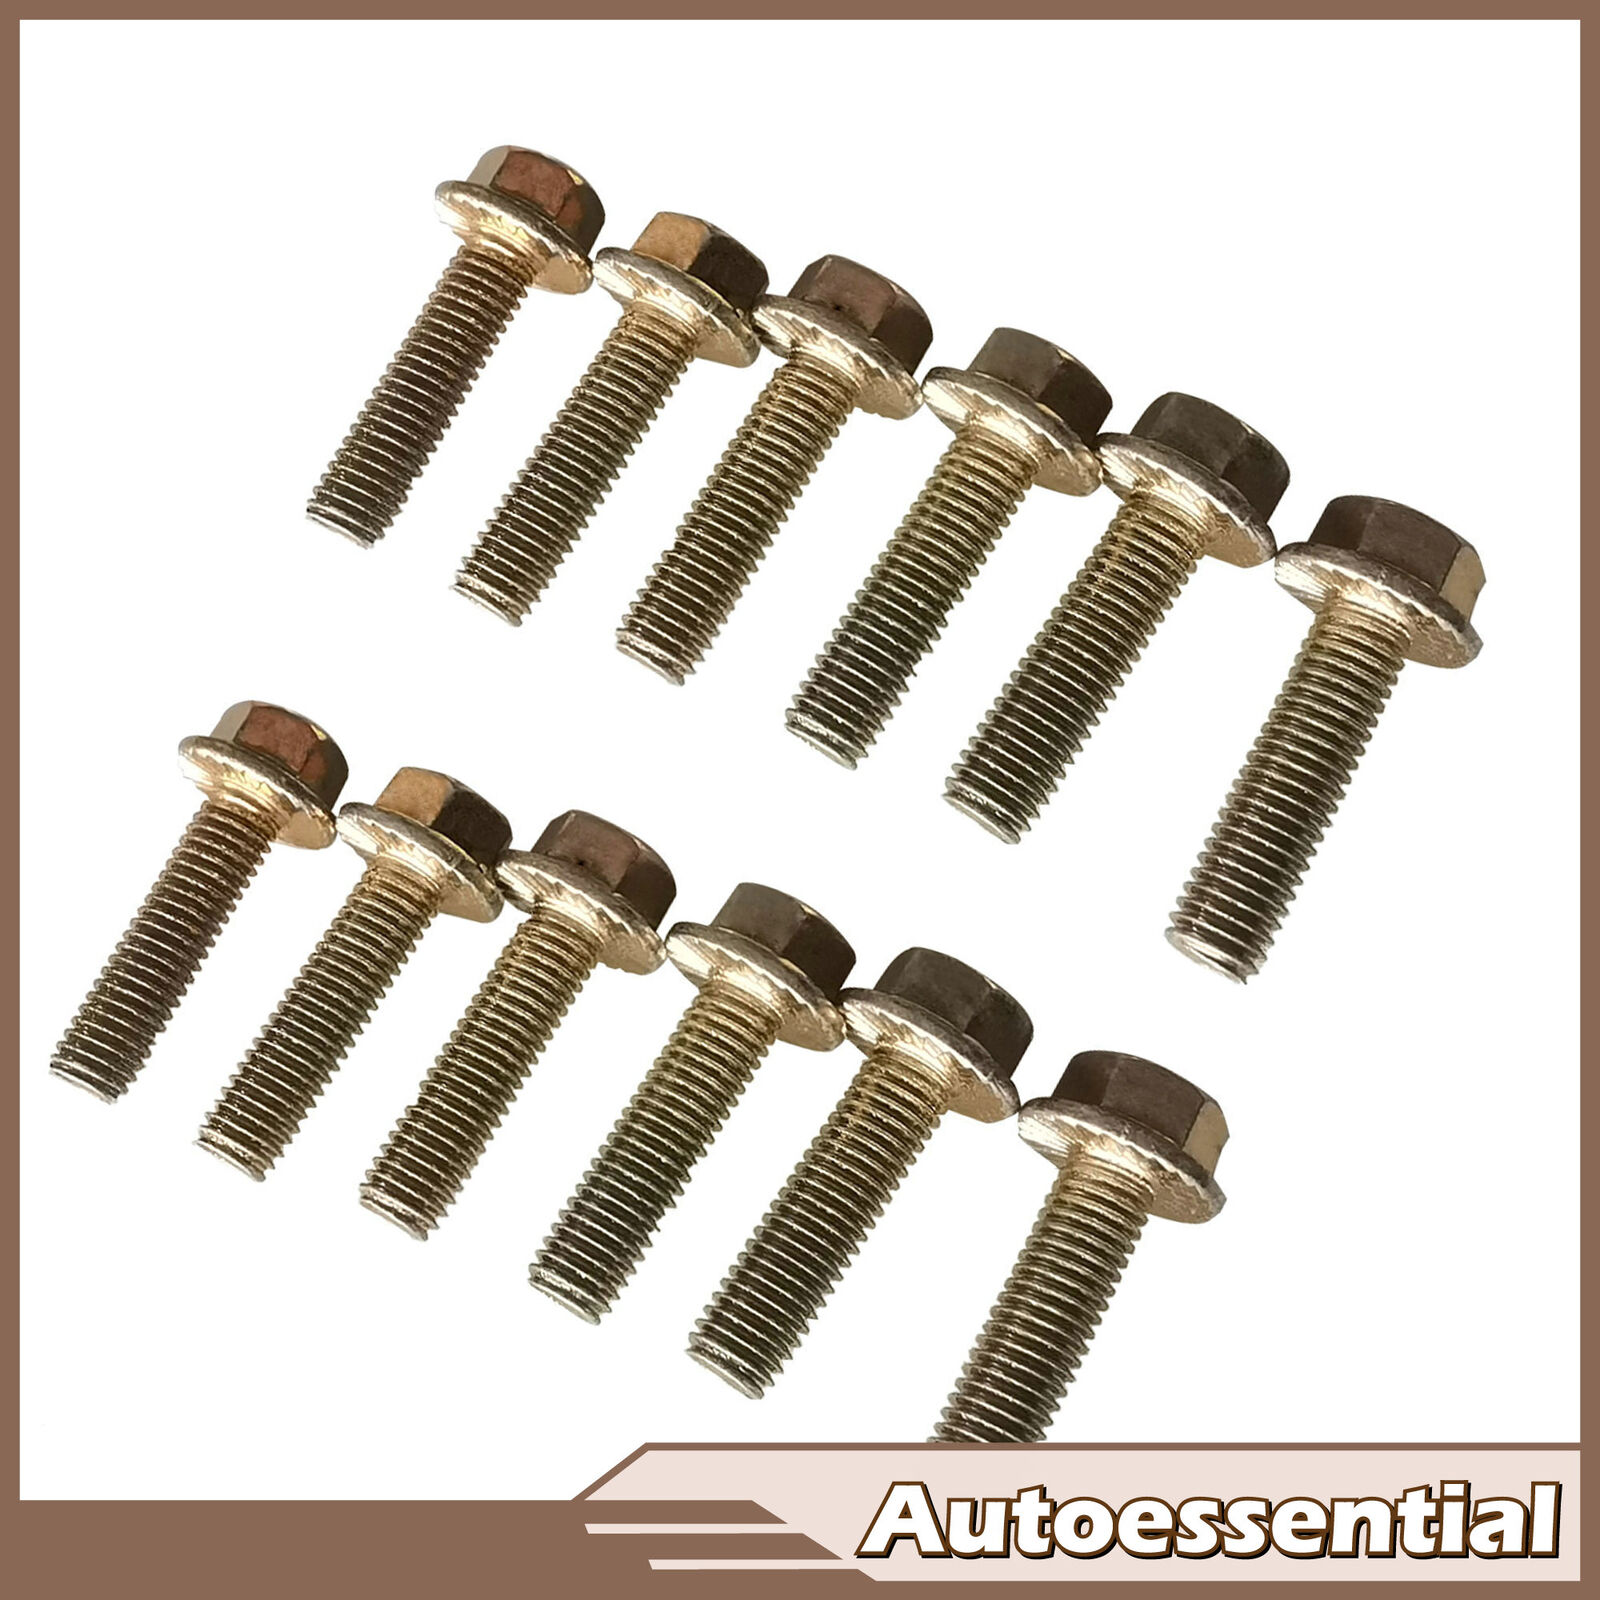 Replacement Exhaust Manifold Header Bolts Hardware Kit For Chevy Ls1 Ls2 Lt1 Ls3